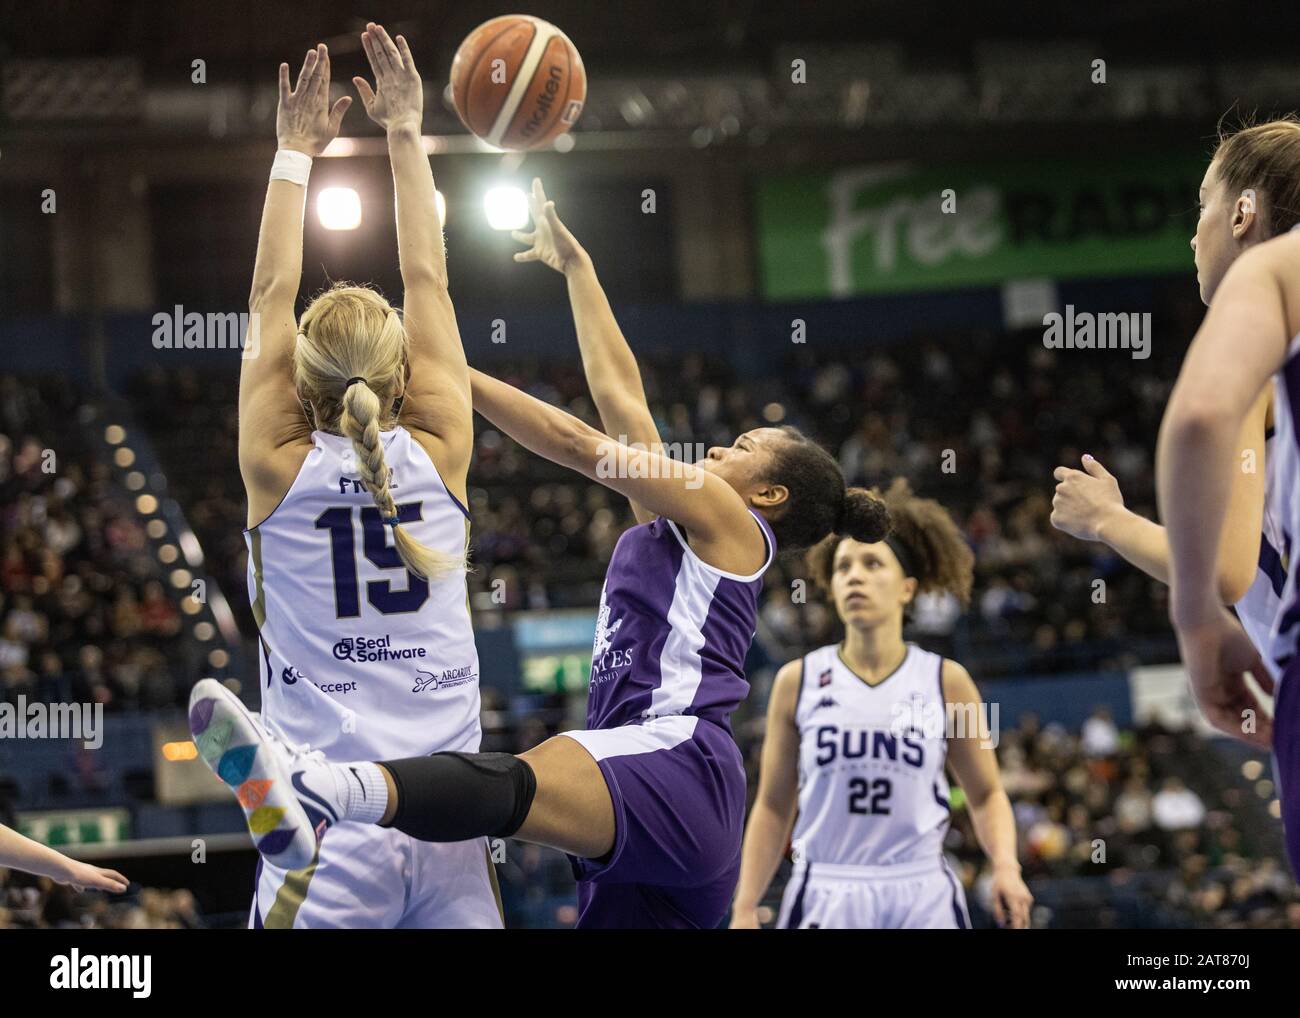 Birmingham, UK, 26 January, 2020.  Sevenoaks Suns defeat Durham Palatinates, 74-64 to win the WBBL cup at Arena Birmingham, Birmingham UK. Durham's Nicolette Fyong Lyew Quee reaches for the ball, Suns' Judi Fritz (15) with the block.  . copyright Carol Moir. Stock Photo